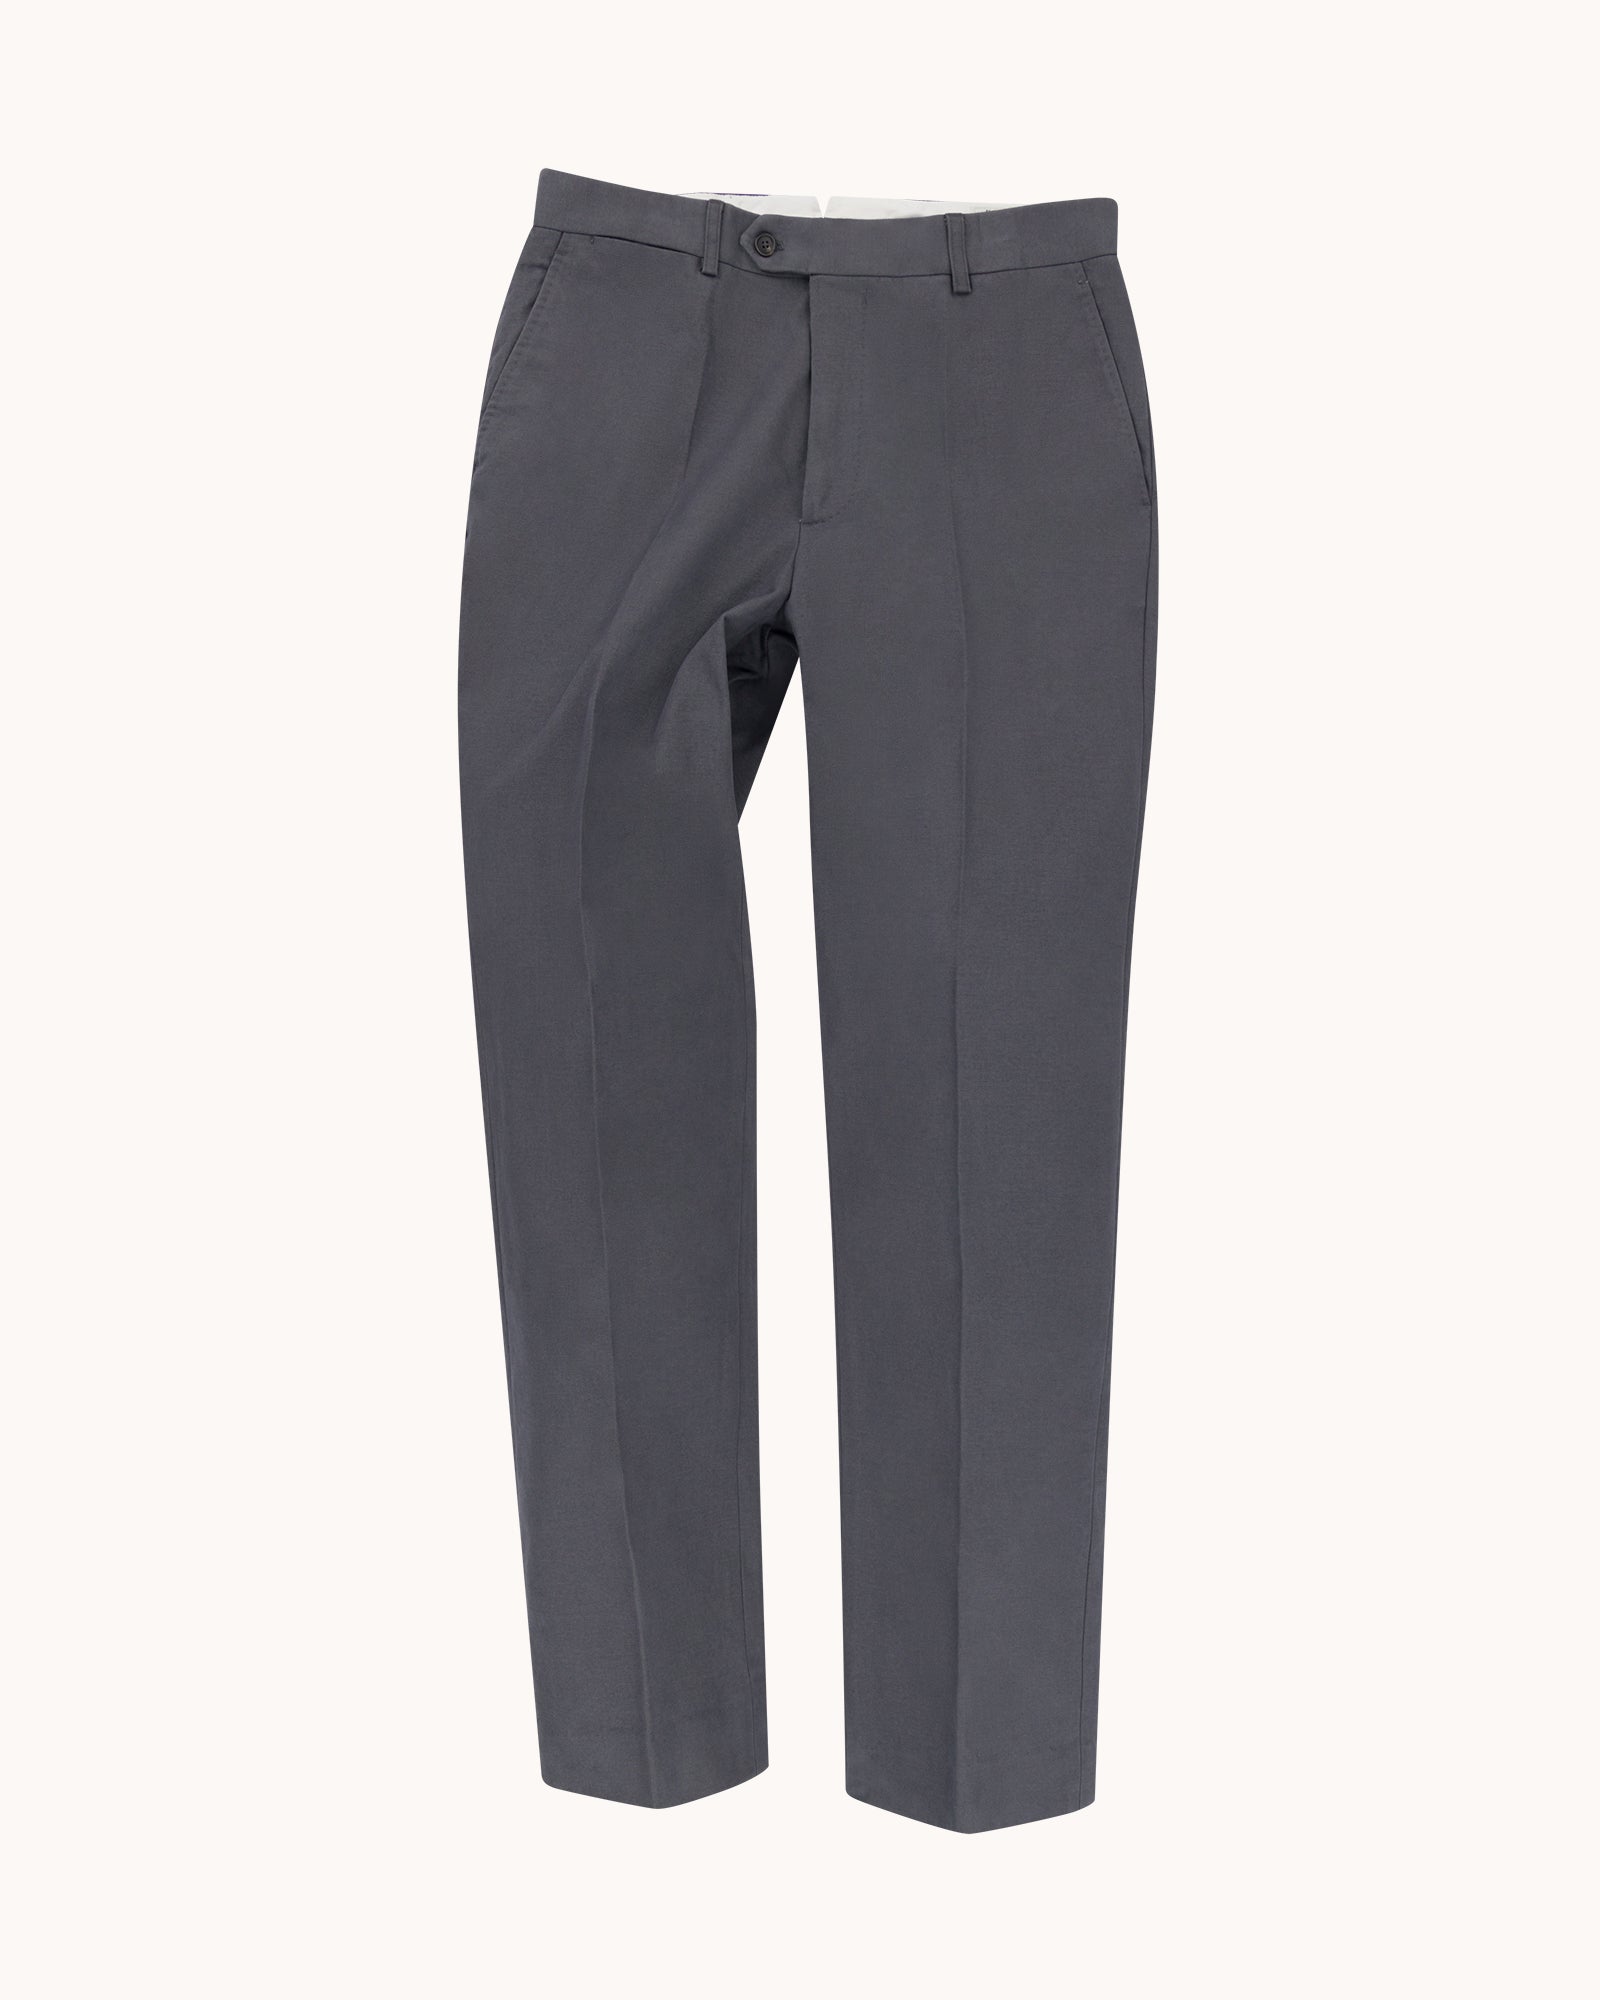 Garment Washed Flat Front Trouser - Grey Cotton Canvas – Natalino